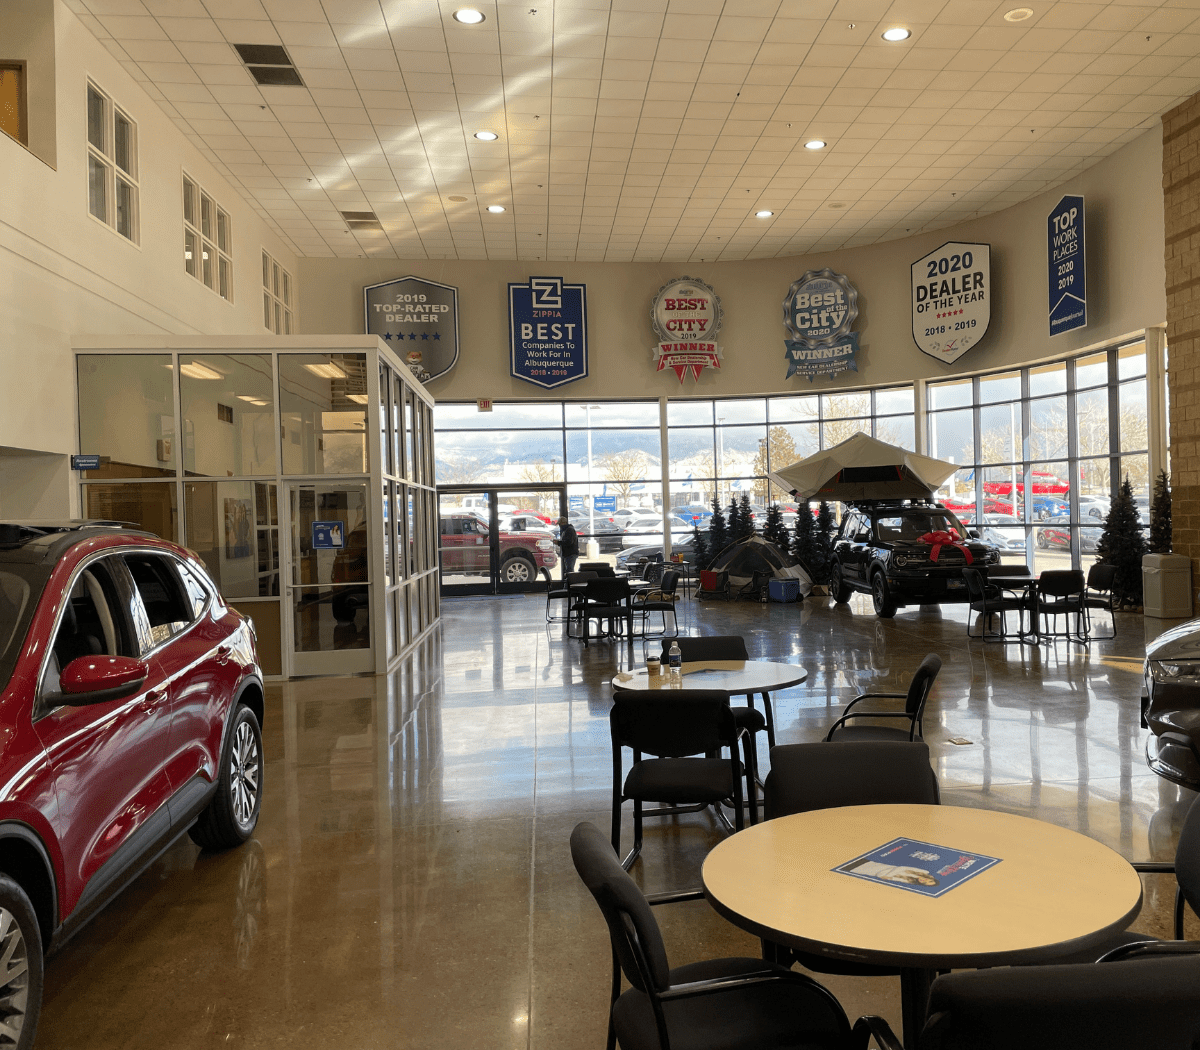 How to Improve the Dealership Experience